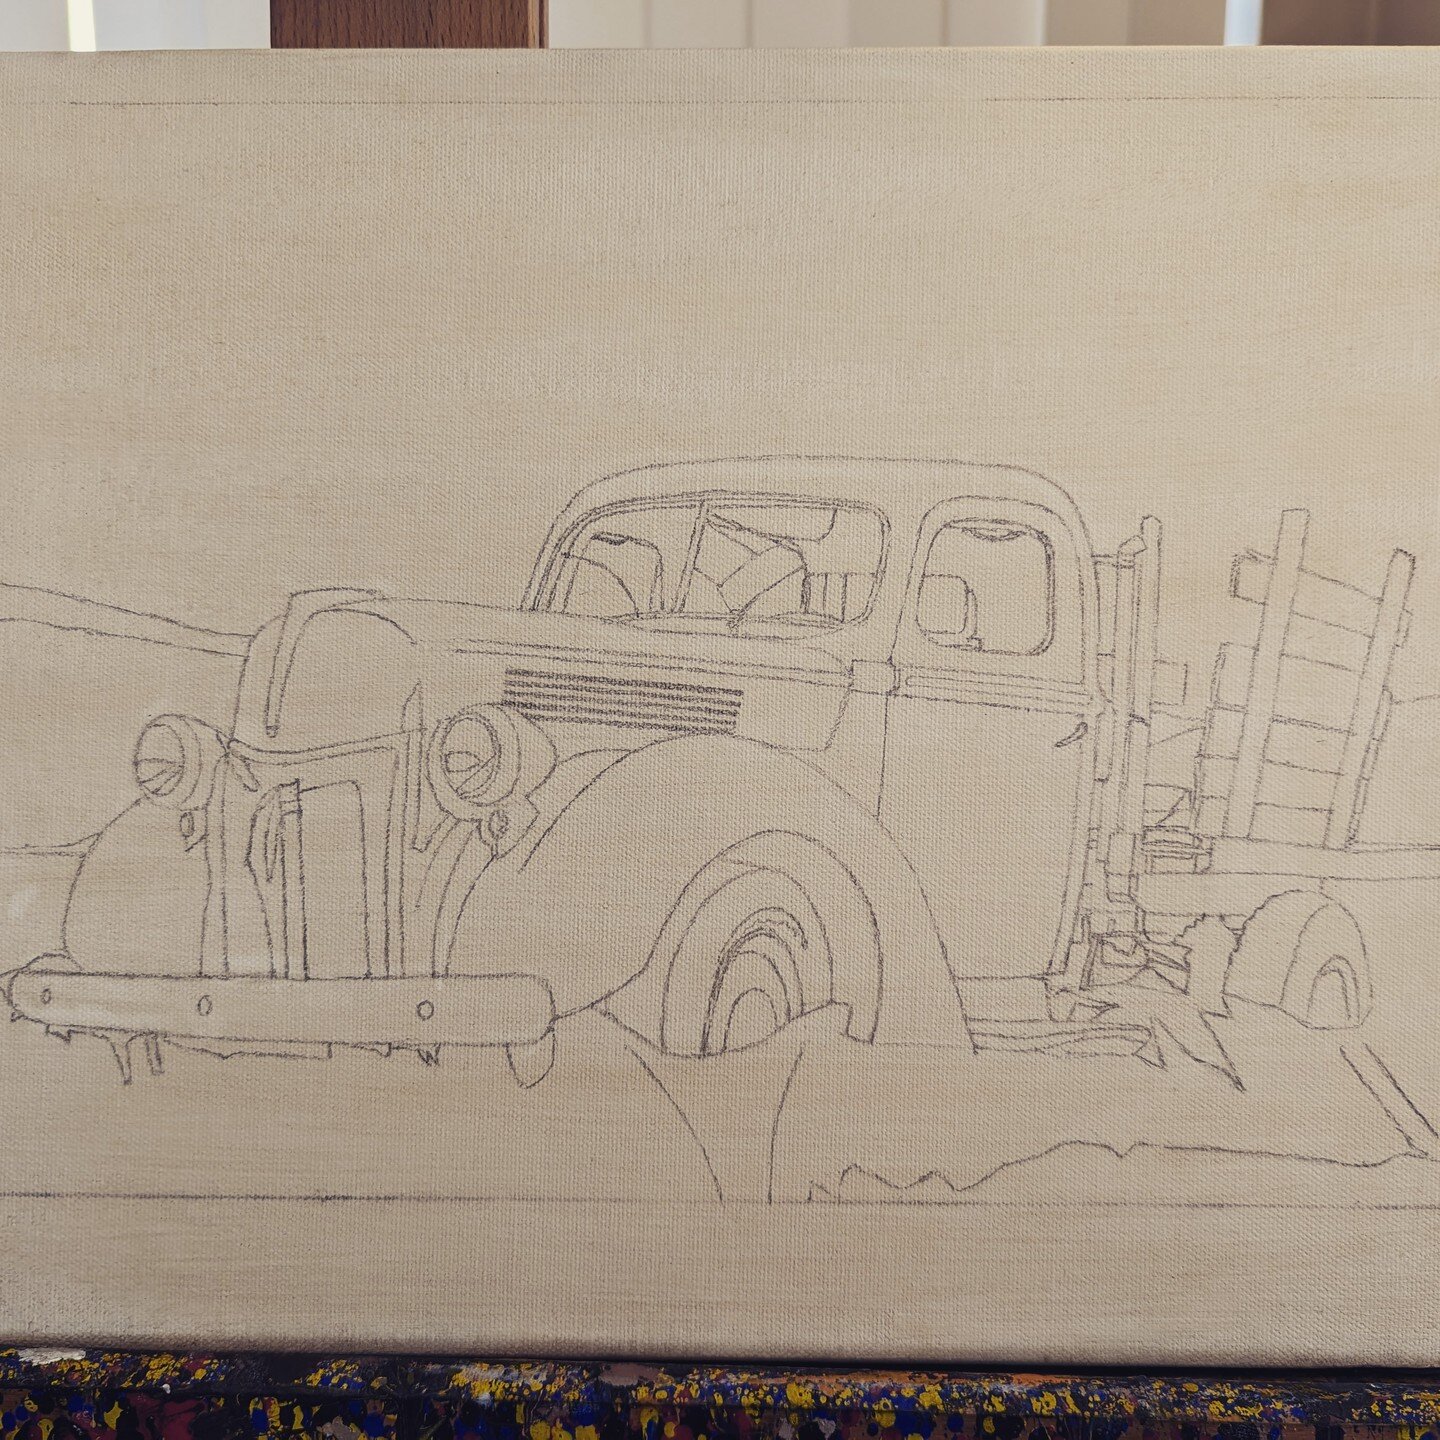 Mister Dylan's current oil painting project! An old truck aging under the desert sun. The canvas is gessoed, toned and the sketch is complete. The wash drawing is next, then paint. 

If you'd like to study drawing and/or painting with Mister Dylan, c